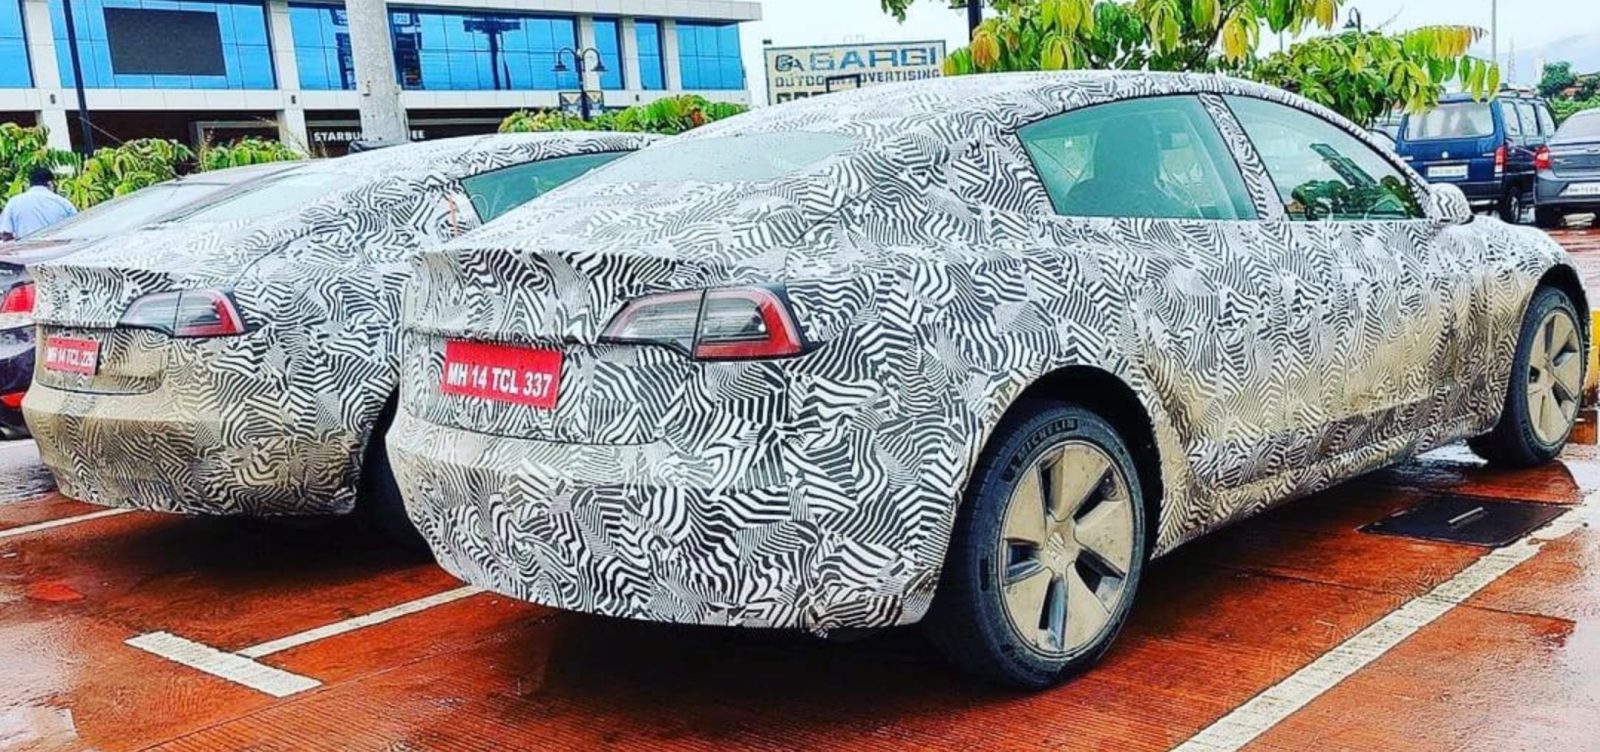 Tesla scouting factory locations in India, and already producing